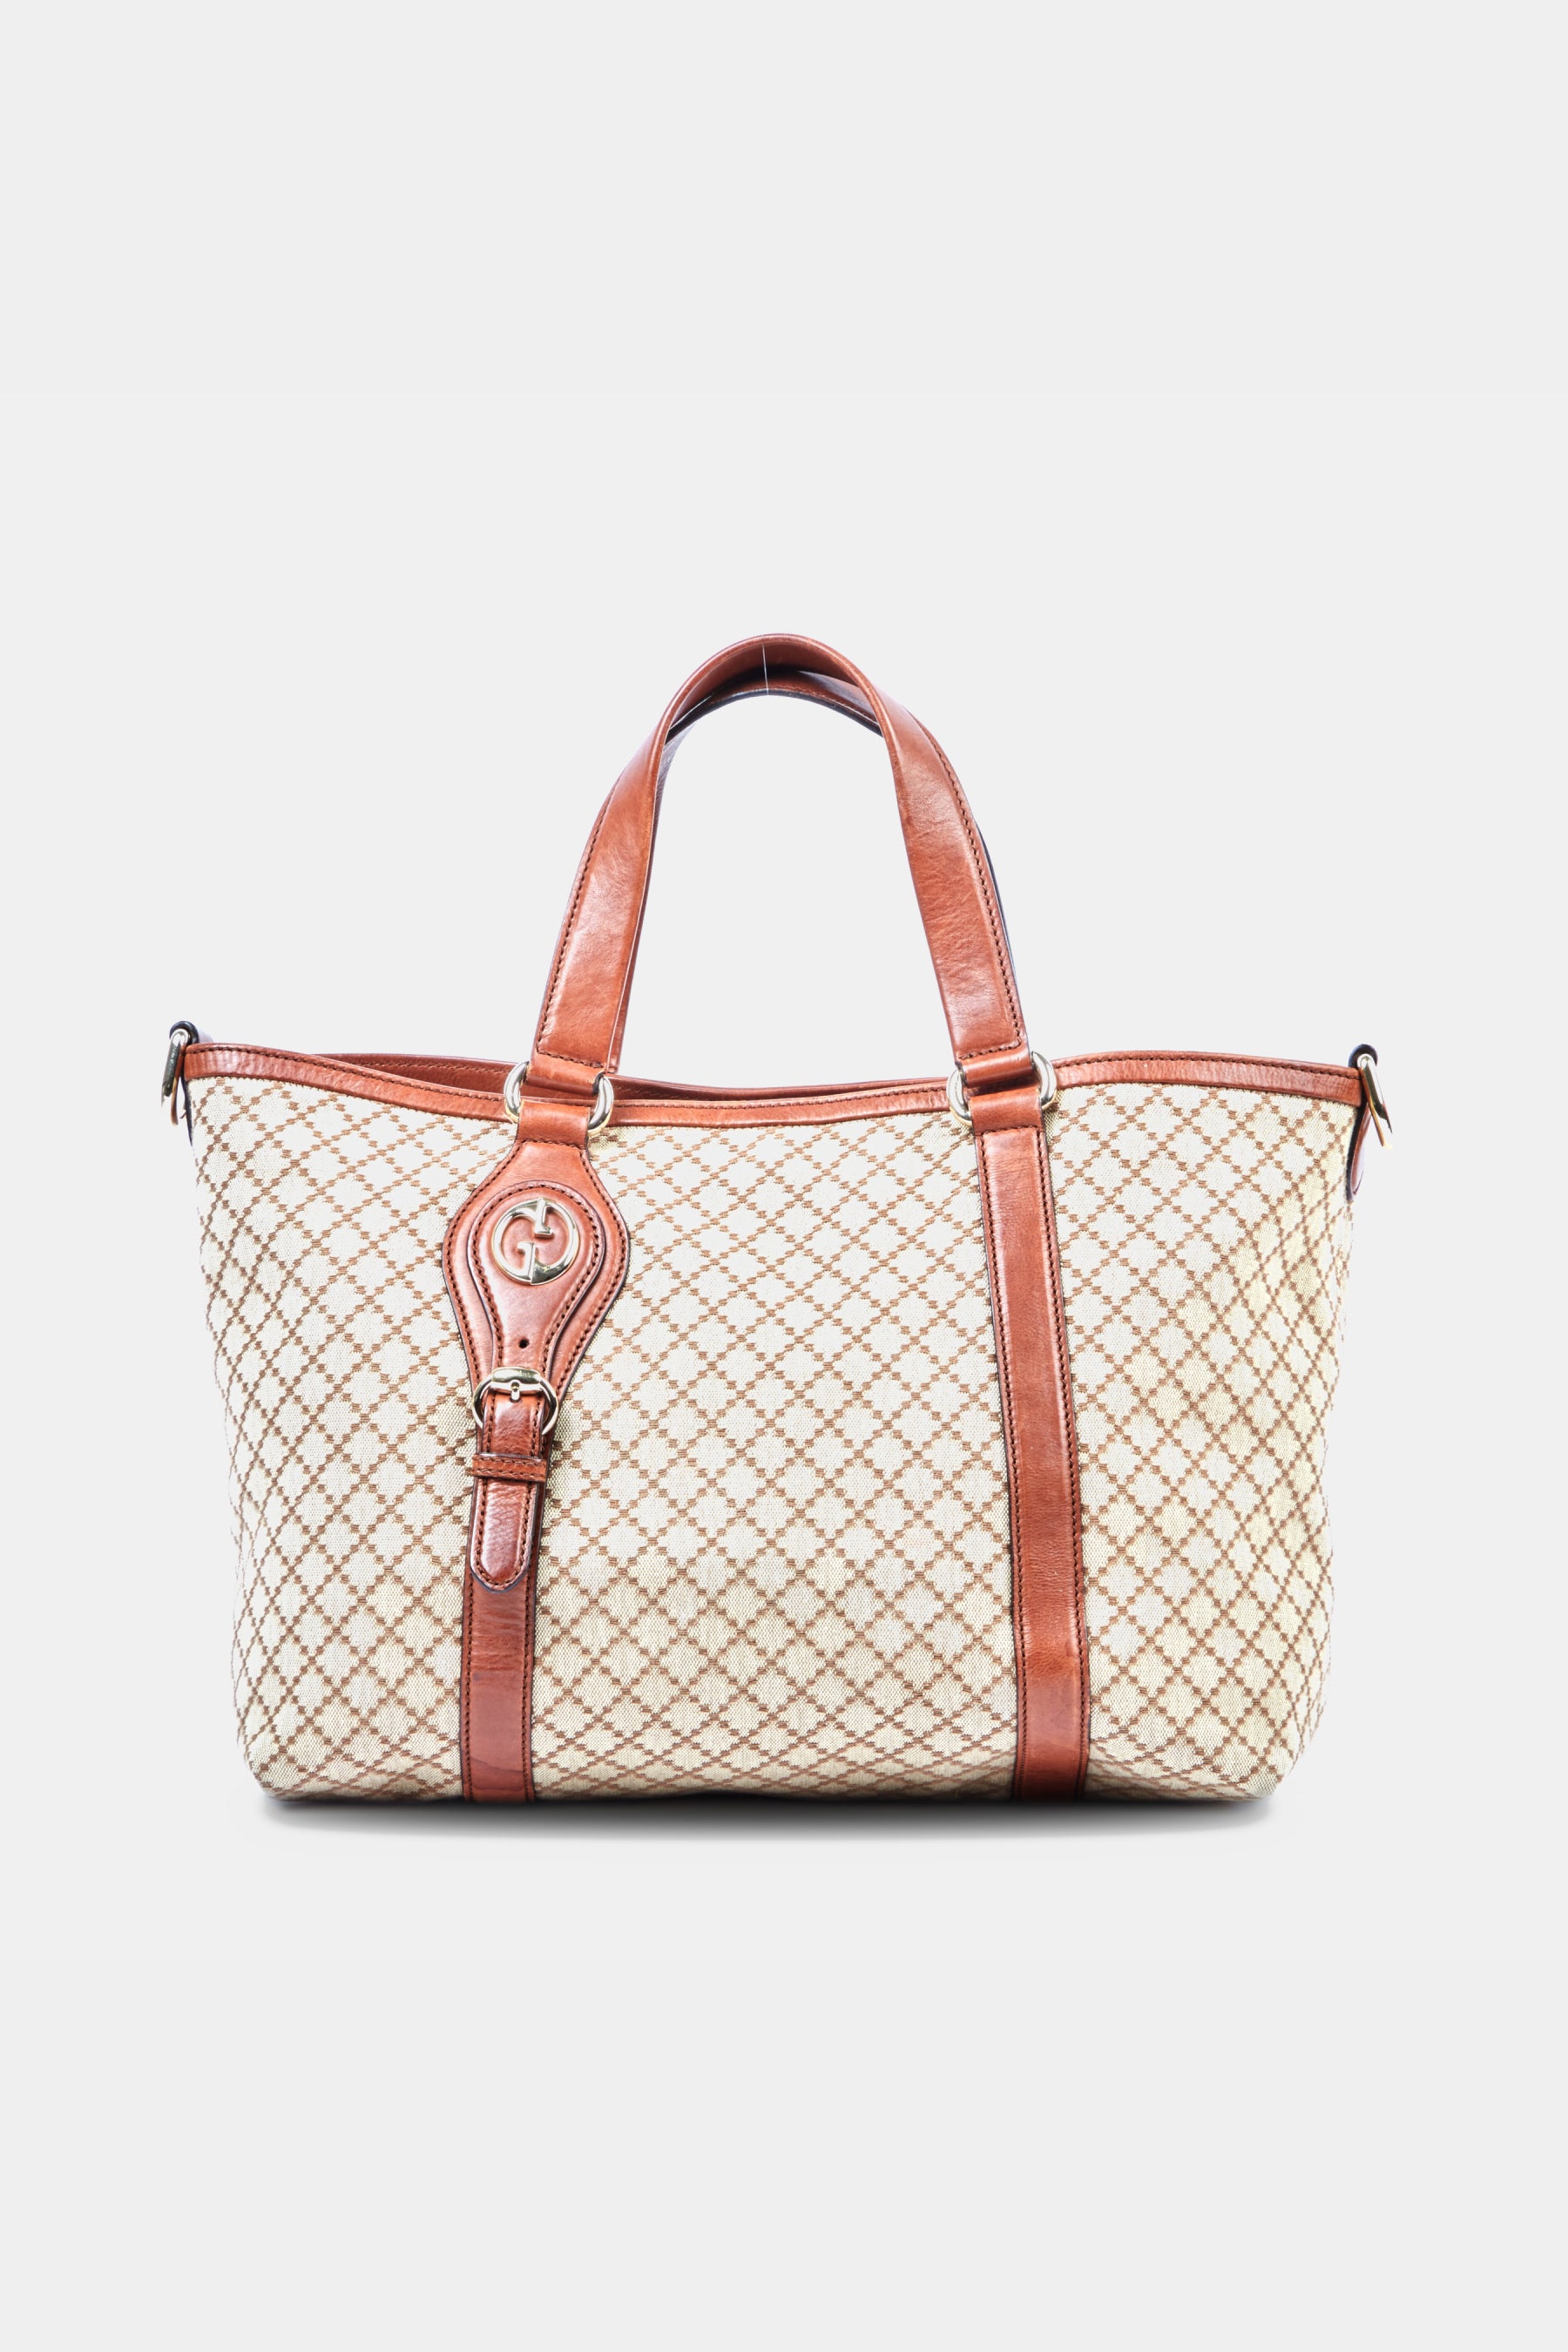 LORD & TAYLOR Bags & Handbags for Women for sale